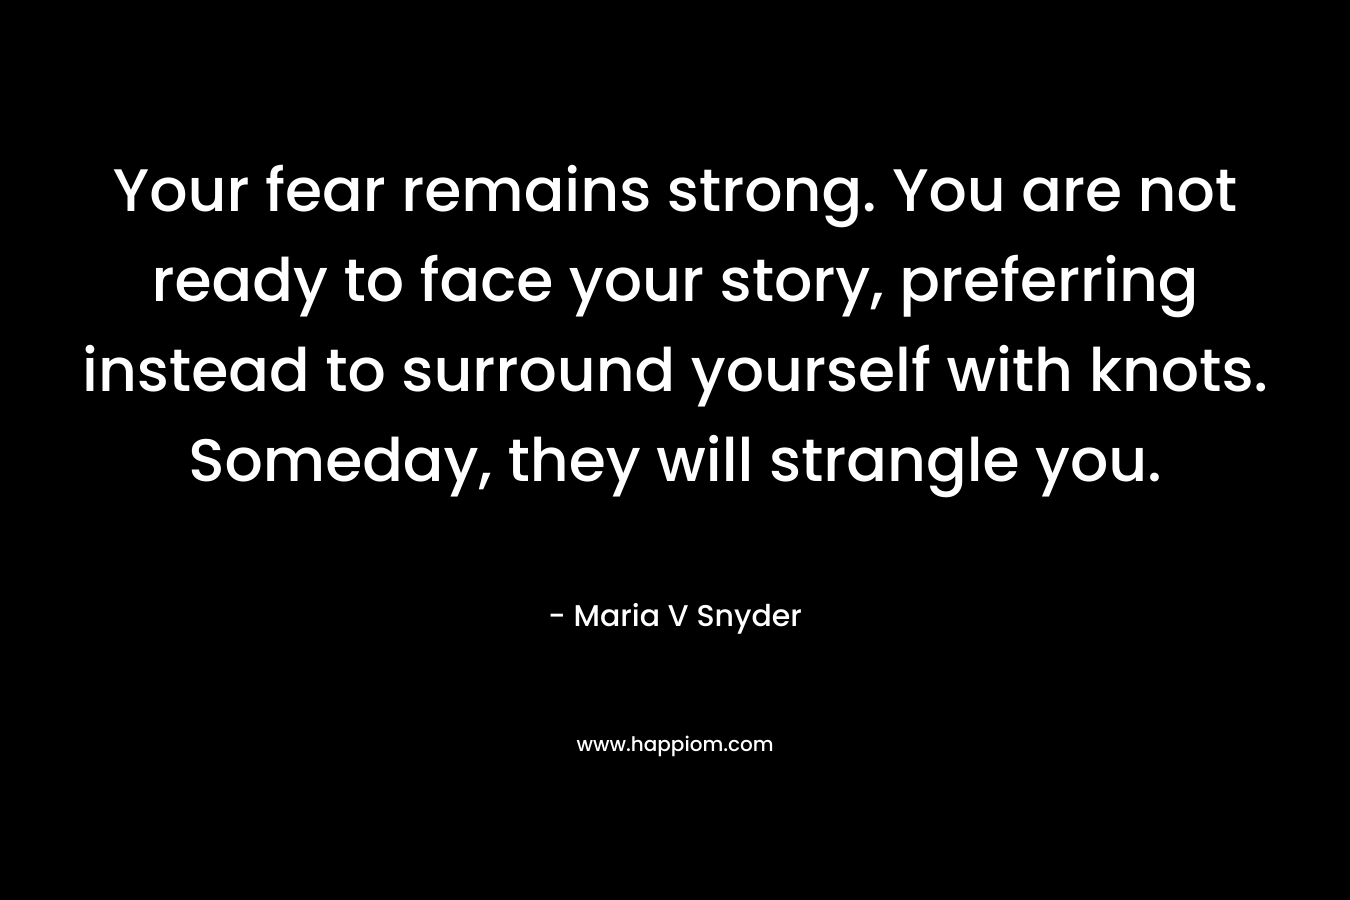 Your fear remains strong. You are not ready to face your story, preferring instead to surround yourself with knots. Someday, they will strangle you. – Maria V Snyder